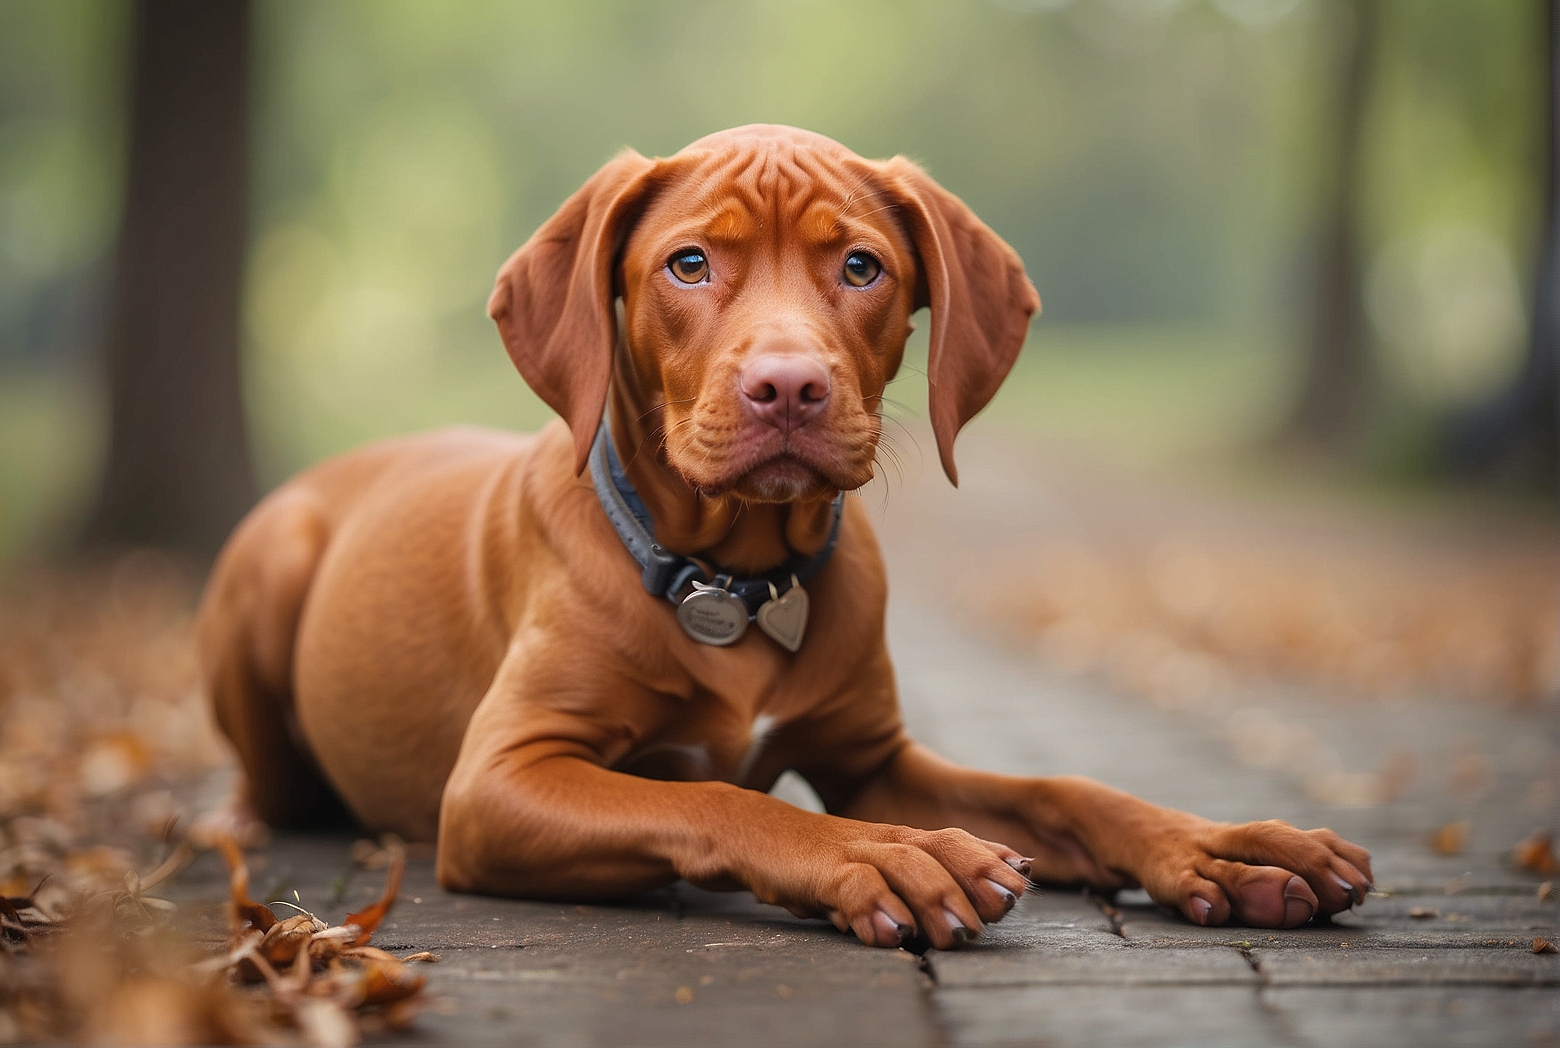 How Much Does it Cost to Buy a Vizsla?